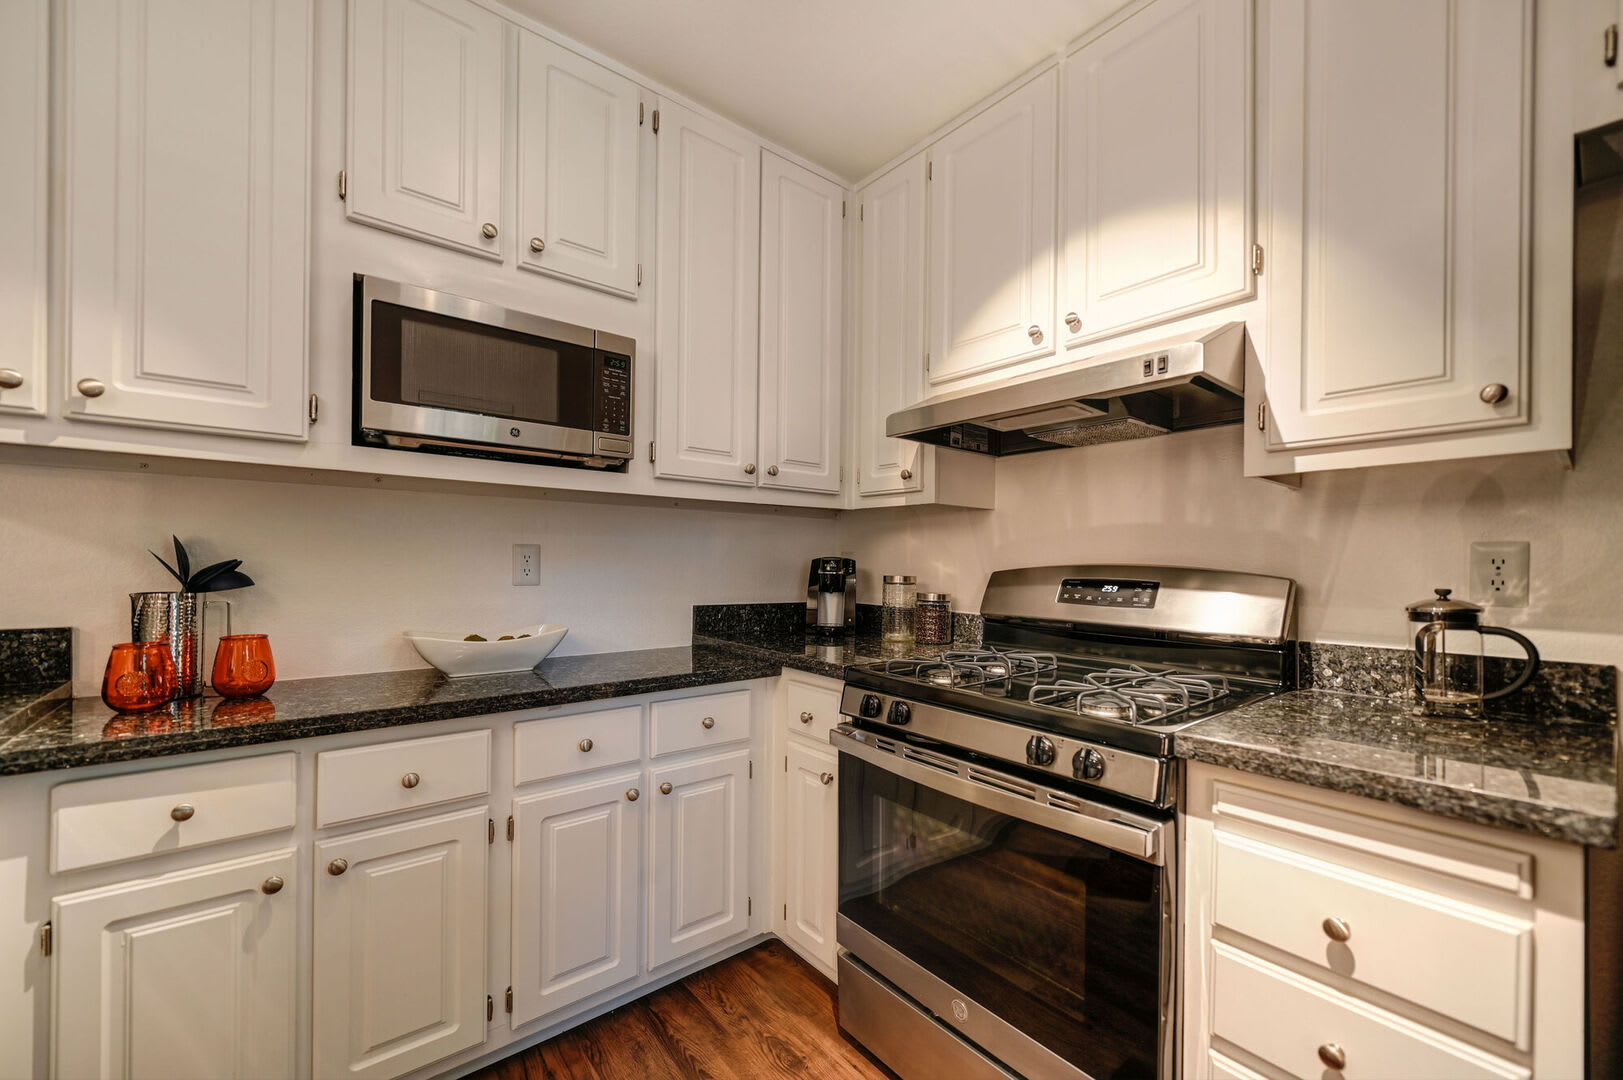 Inside view of the kitchen and modern appliances at Lake Pointe Apartments in Folsom, California